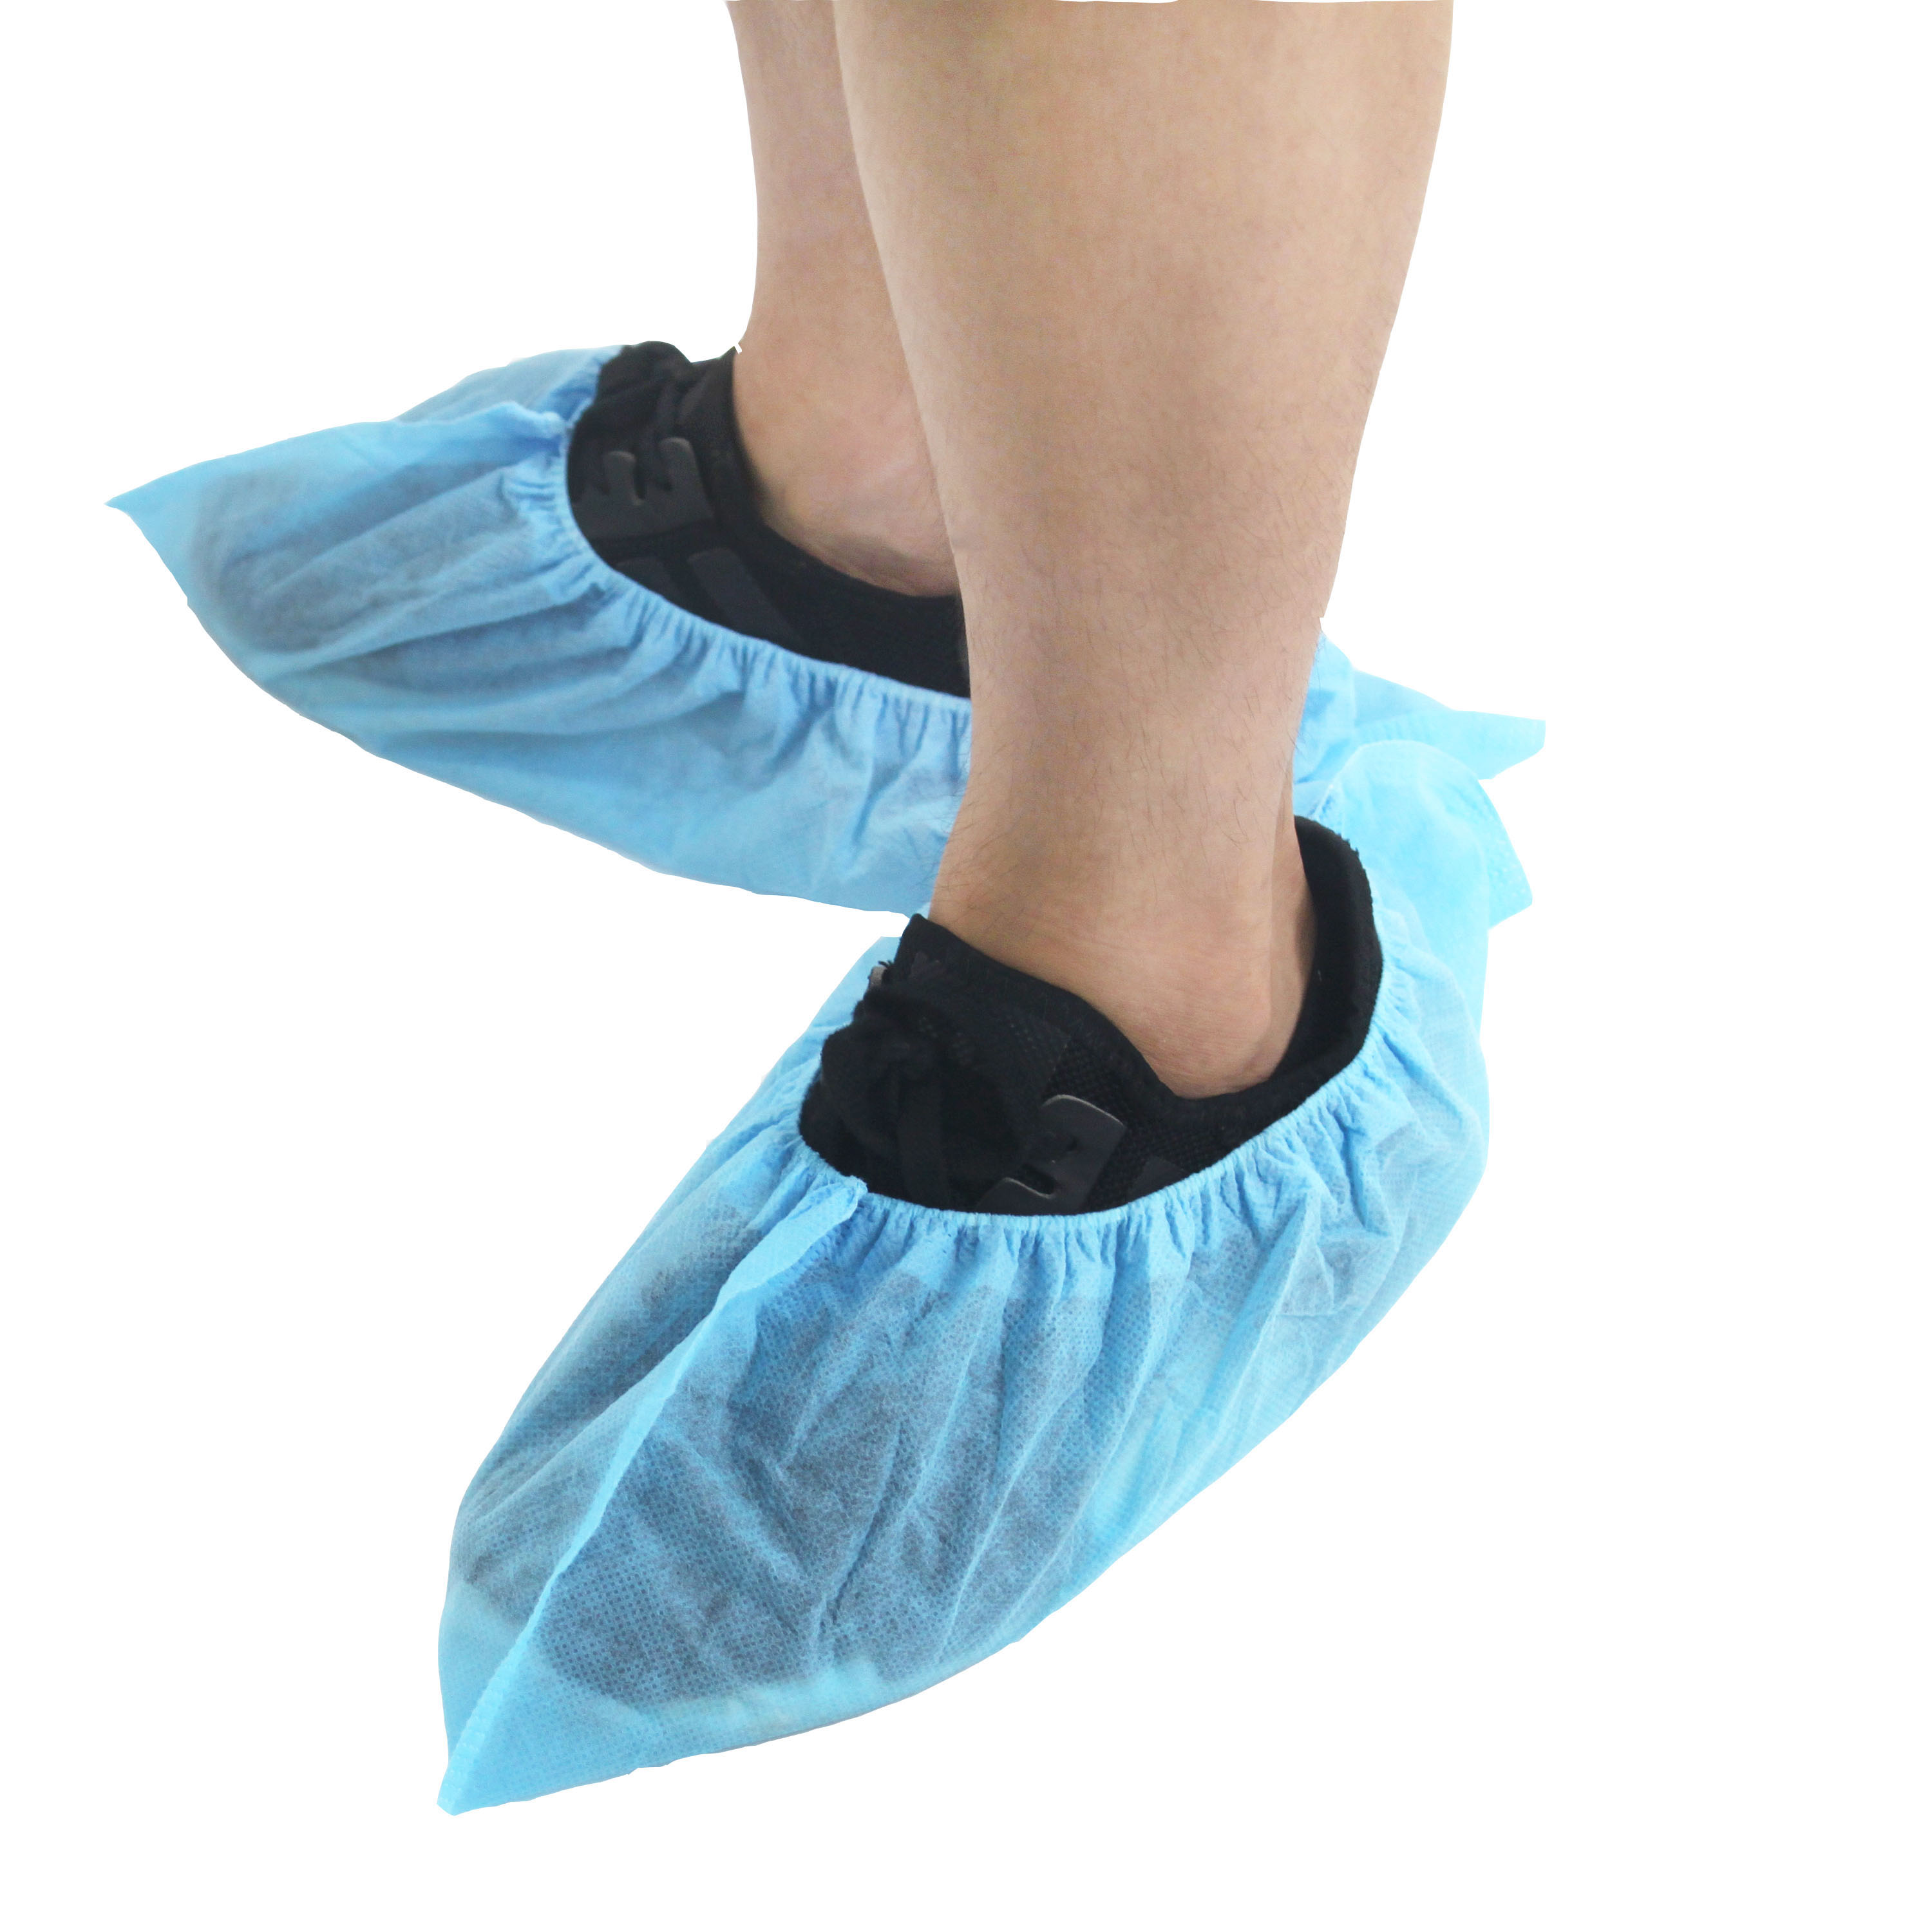 Disposable nonwoven shoe cover - Buy Product on Xiantao Topmed Nonwoven ...